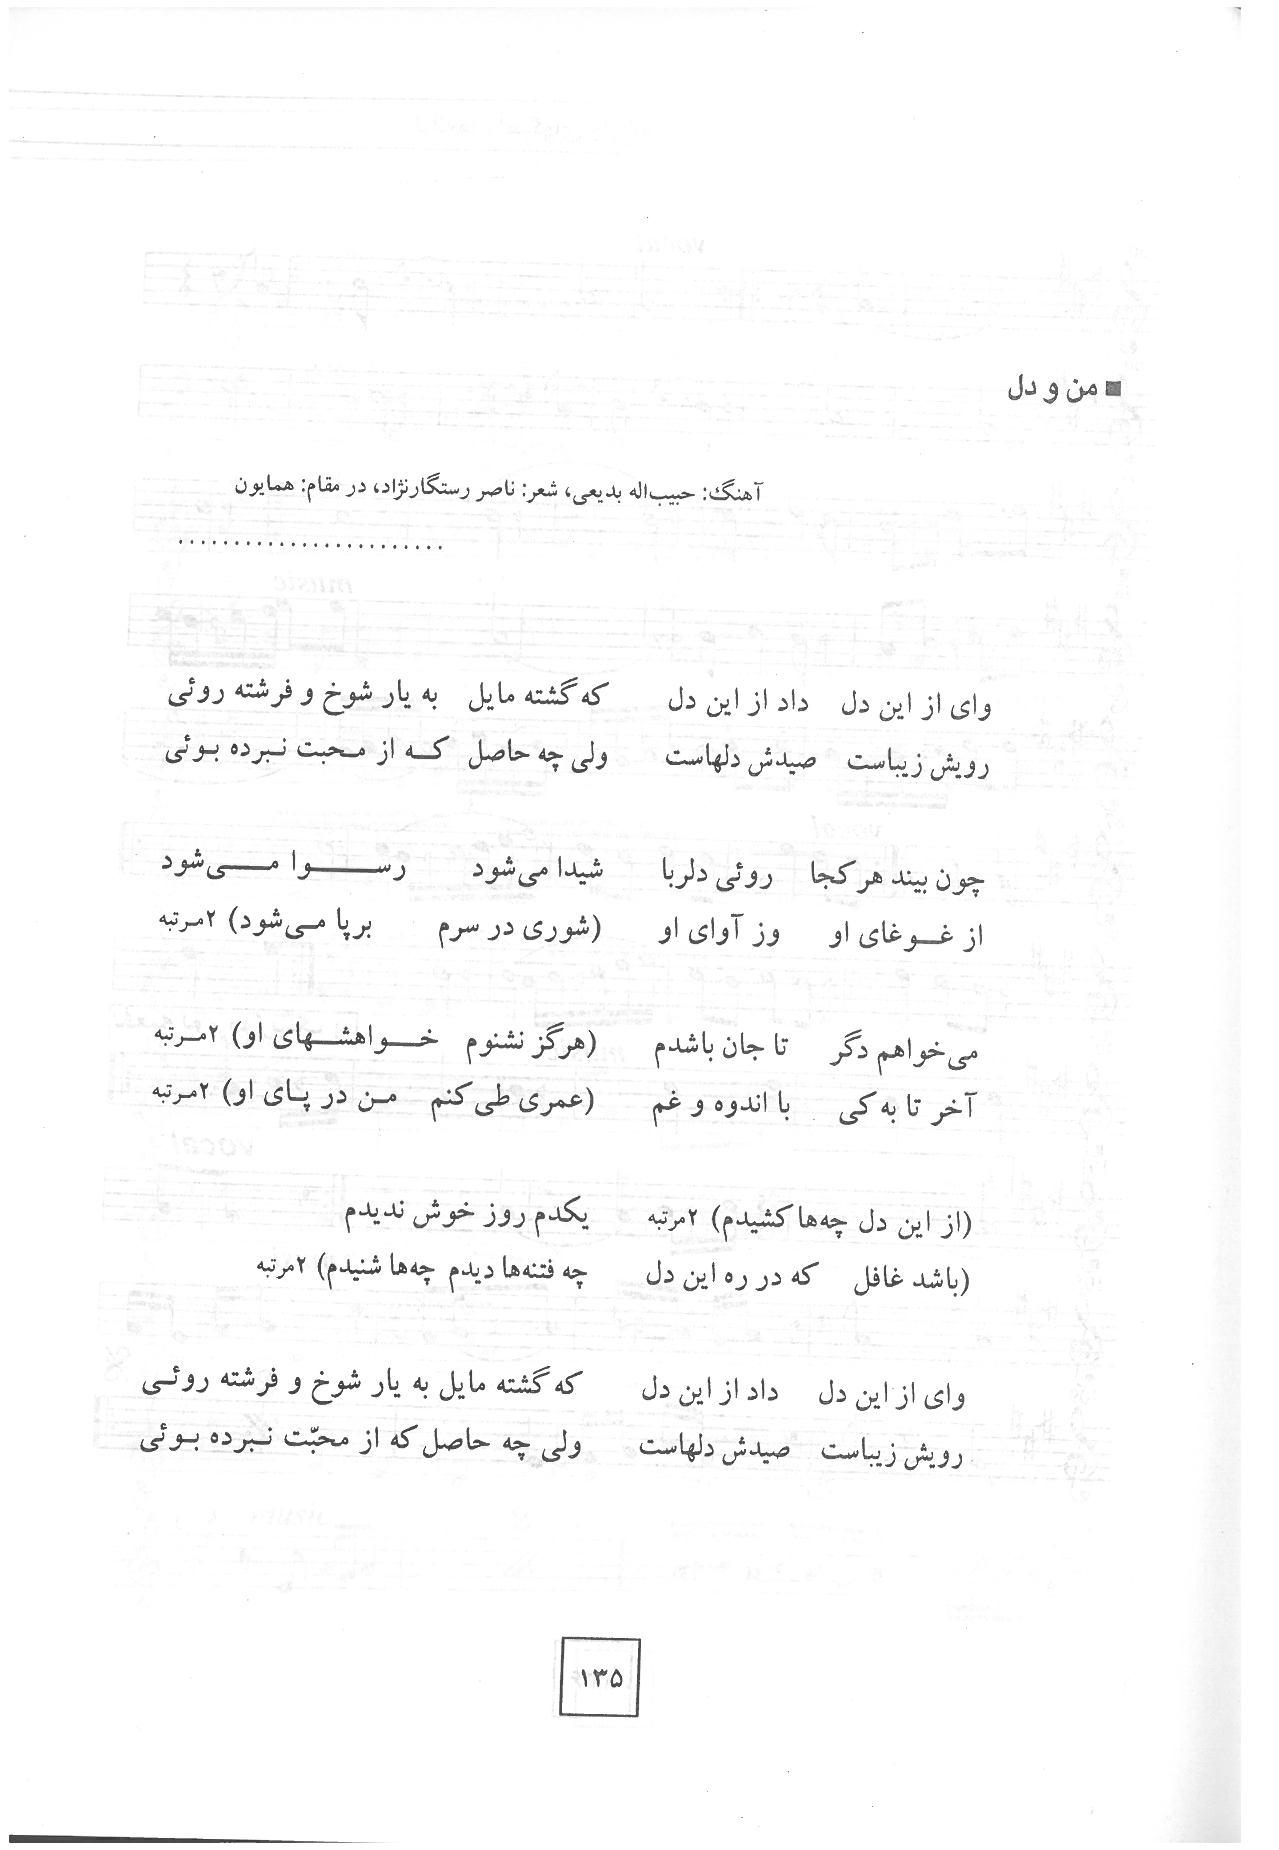 A page of arabic writing with some writing on it